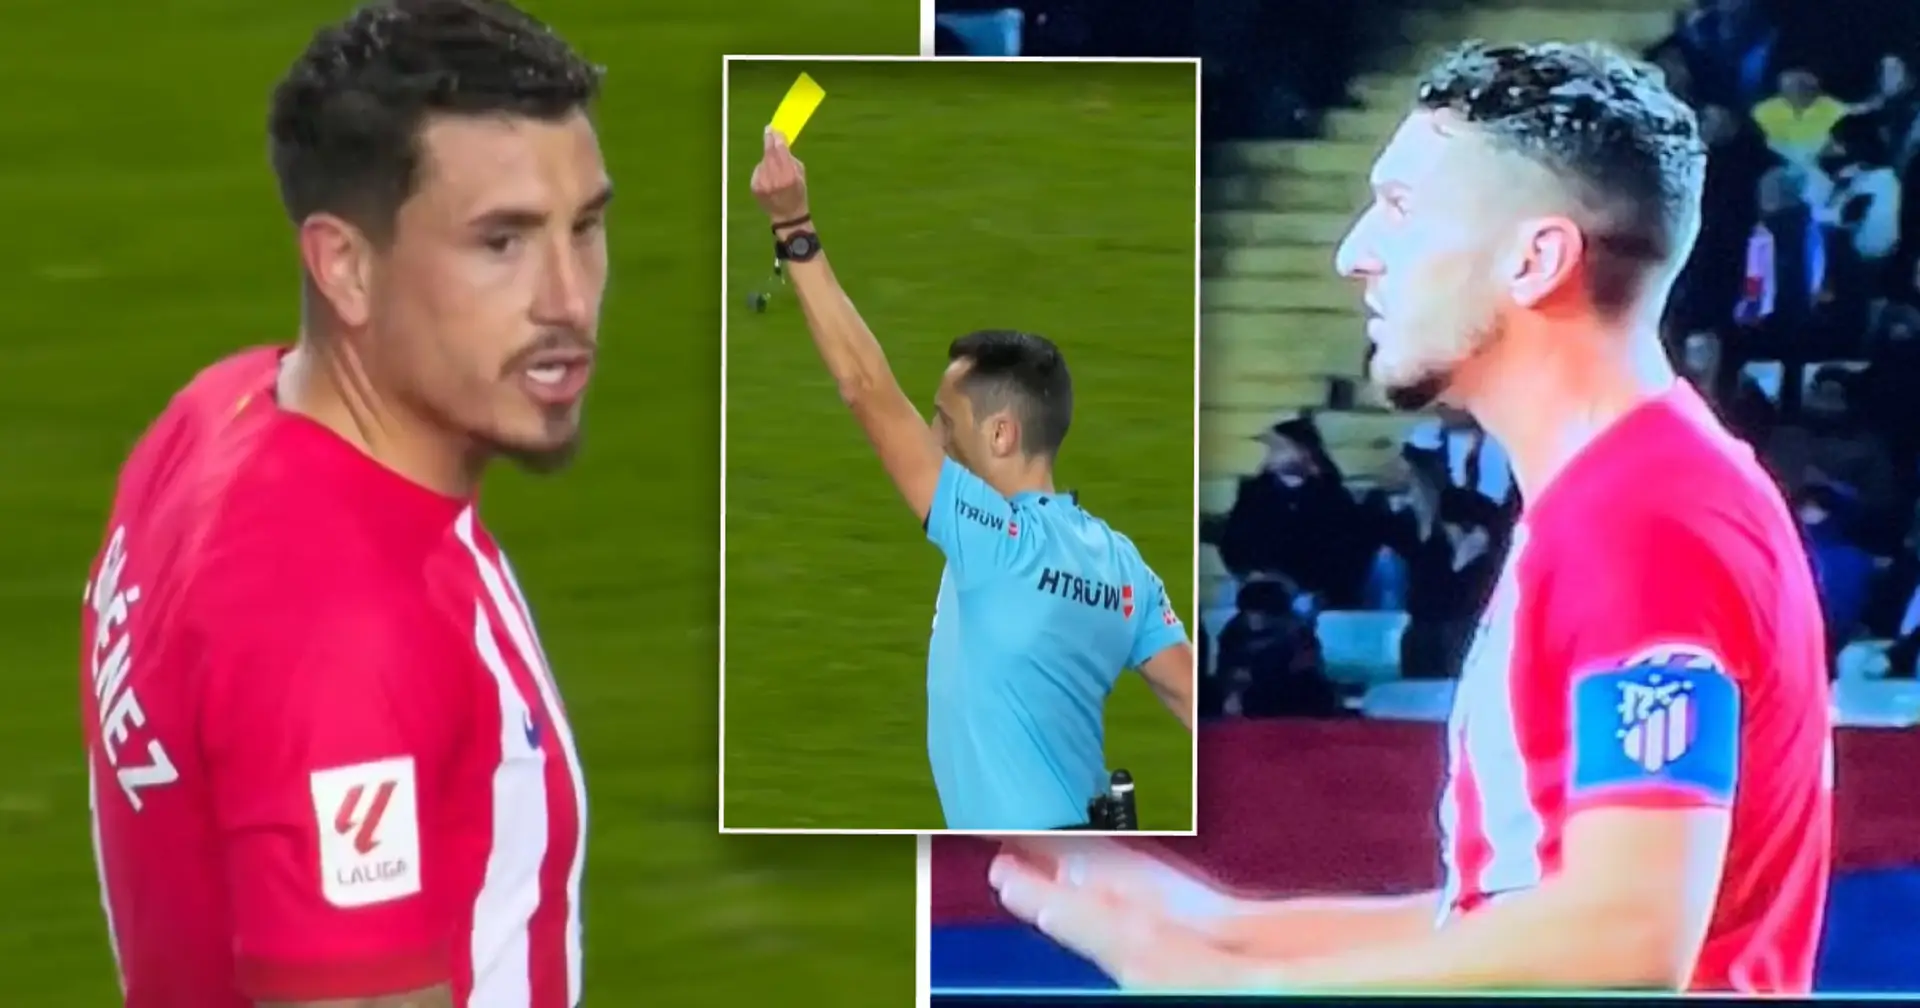 'He's trying to get you sent off': Koke's serious warning to Atleti teammate about Felix picked up by mics